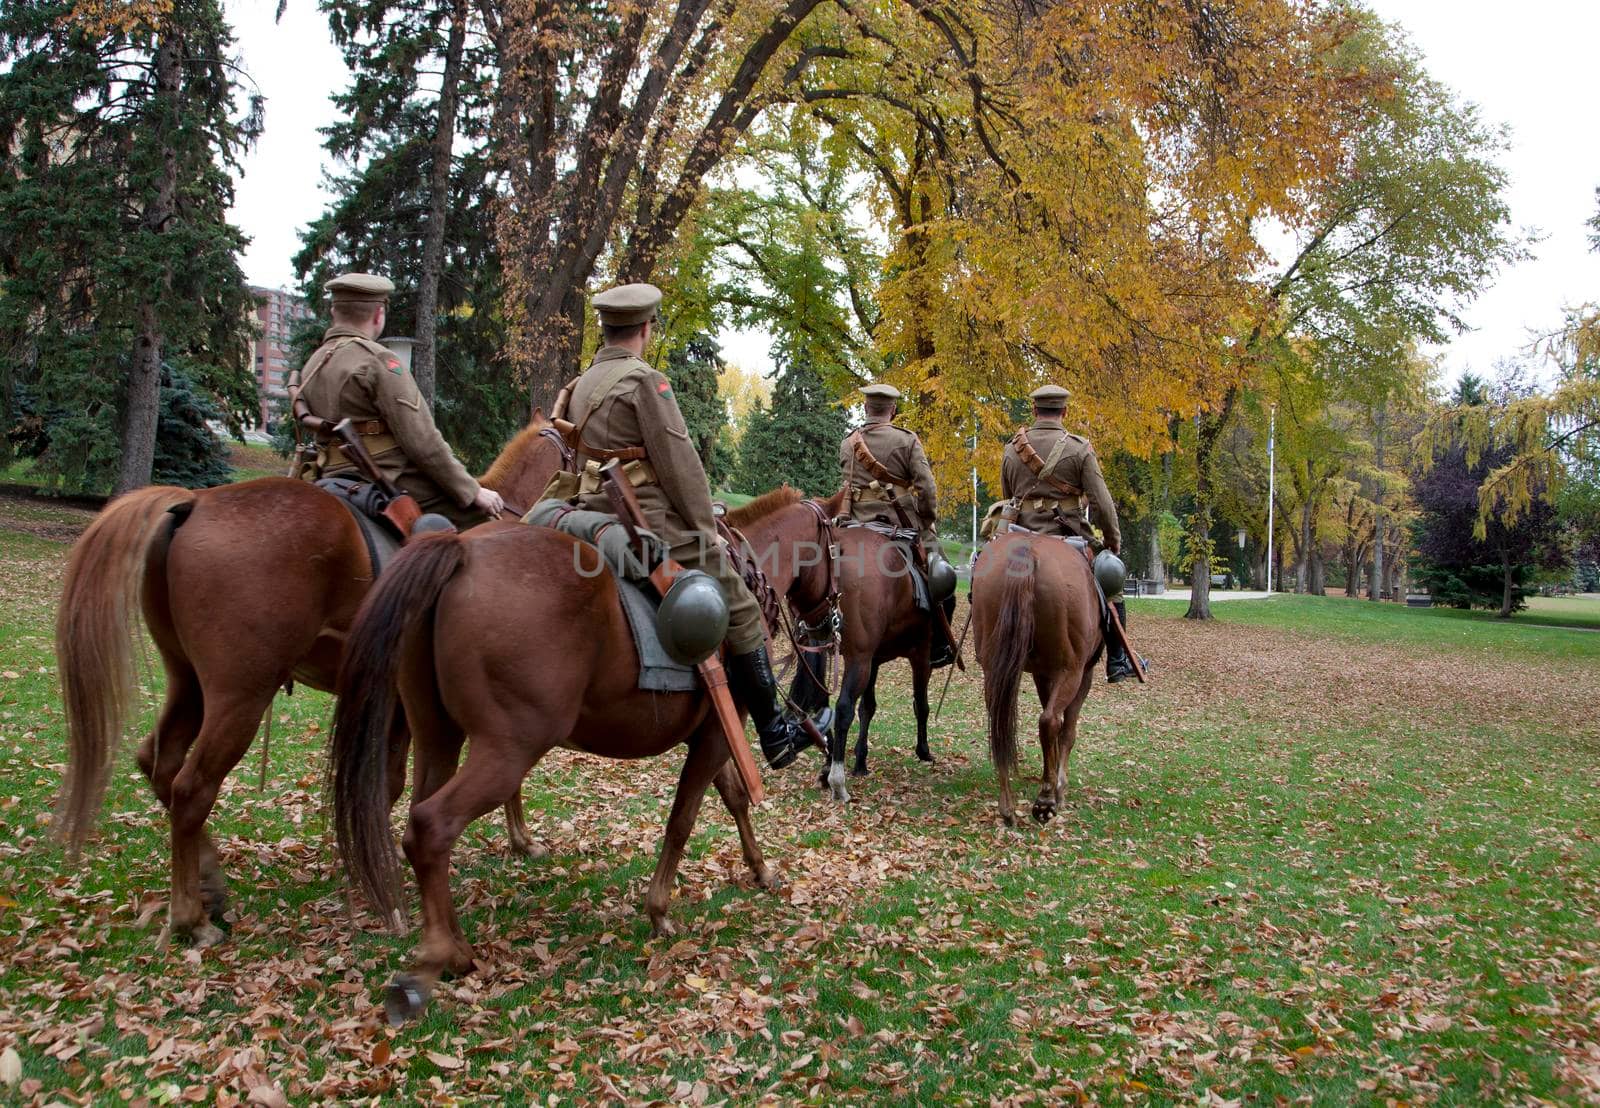  On October 6, 2017: Lord Strathcona's Mounted horse troop rides on display in Edmonton's legislature park 